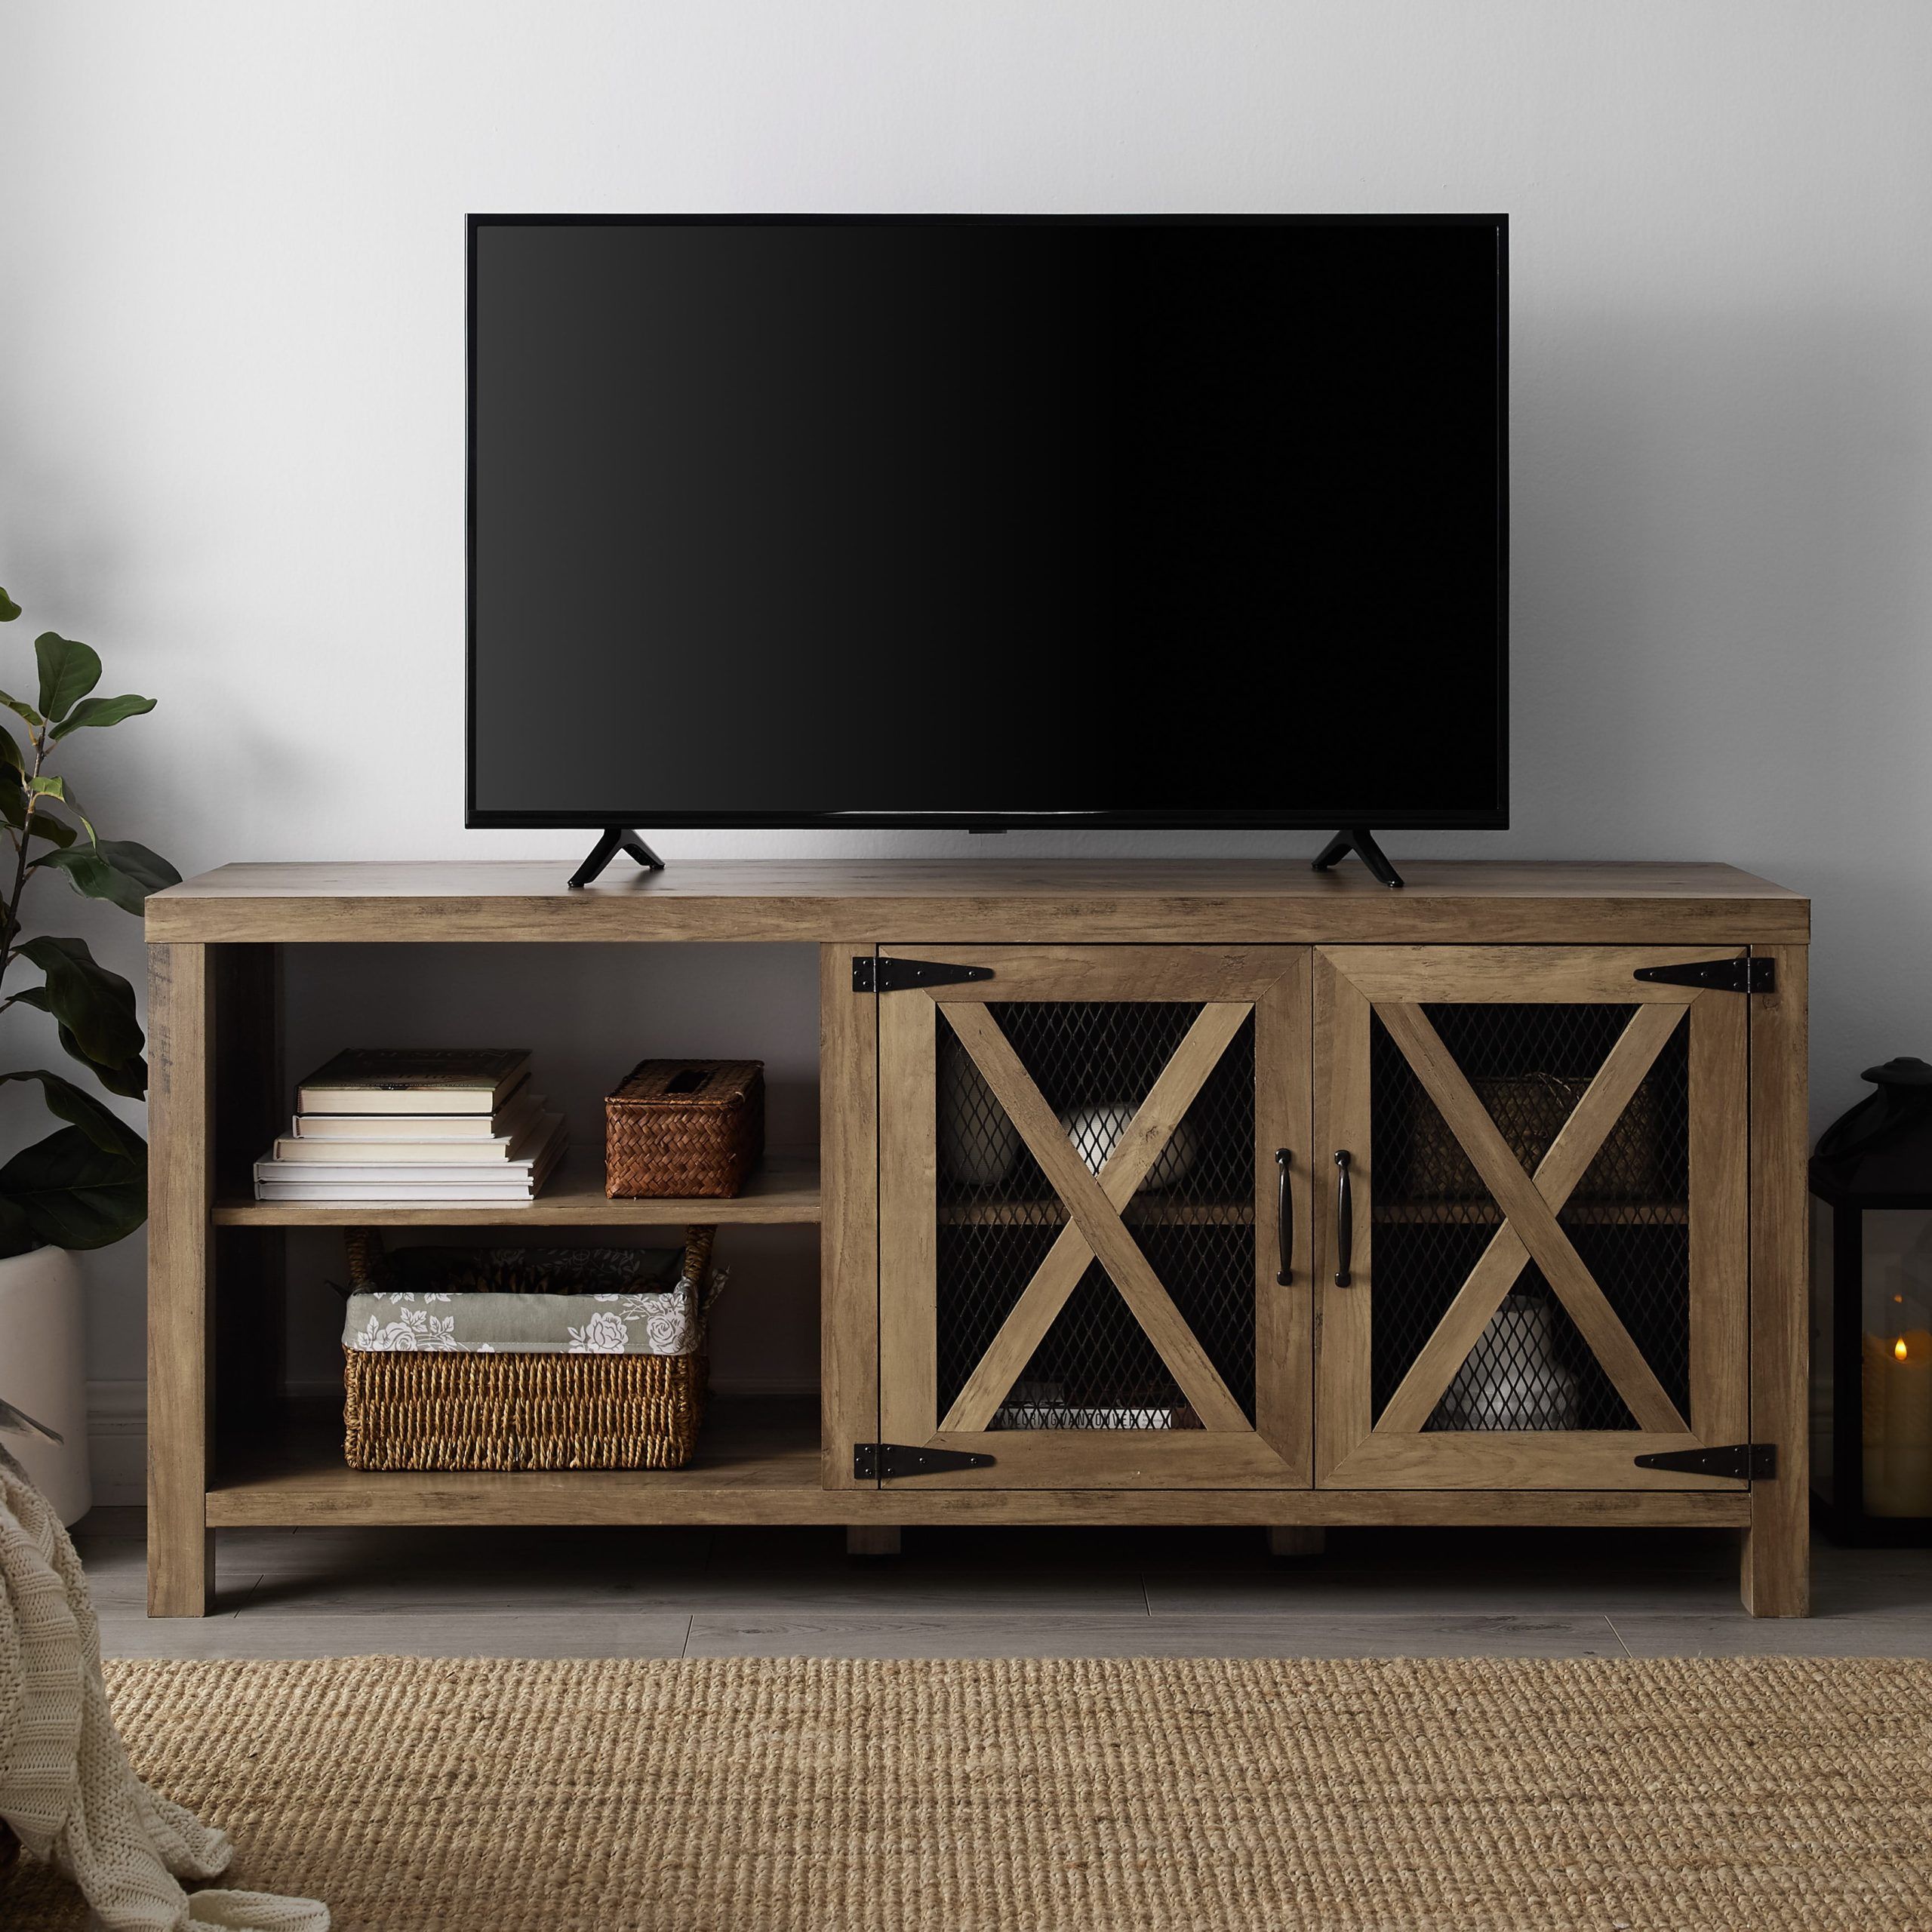 Manor Park Farmhouse Tv Stand For Tvs Up To 65", Reclaimed Barnwood Regarding Farmhouse Tv Stands (Gallery 4 of 20)